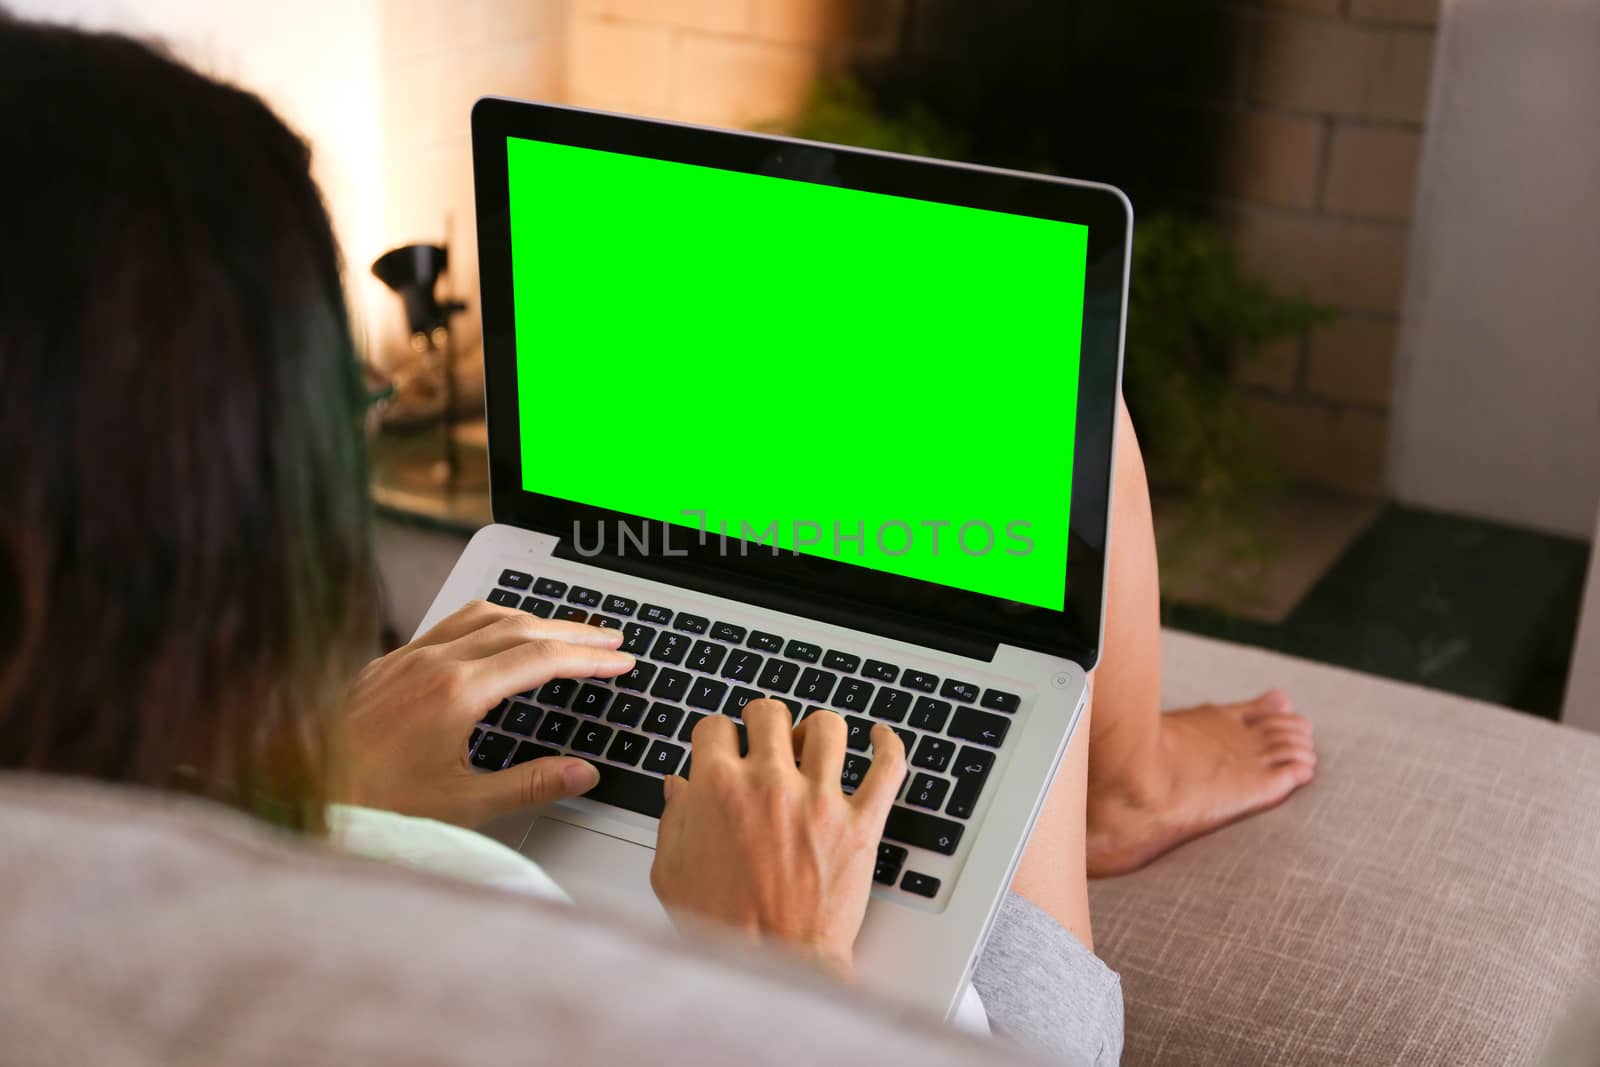 A young woman works on her laptop with the green screen at home sitting on the sofa in her living room